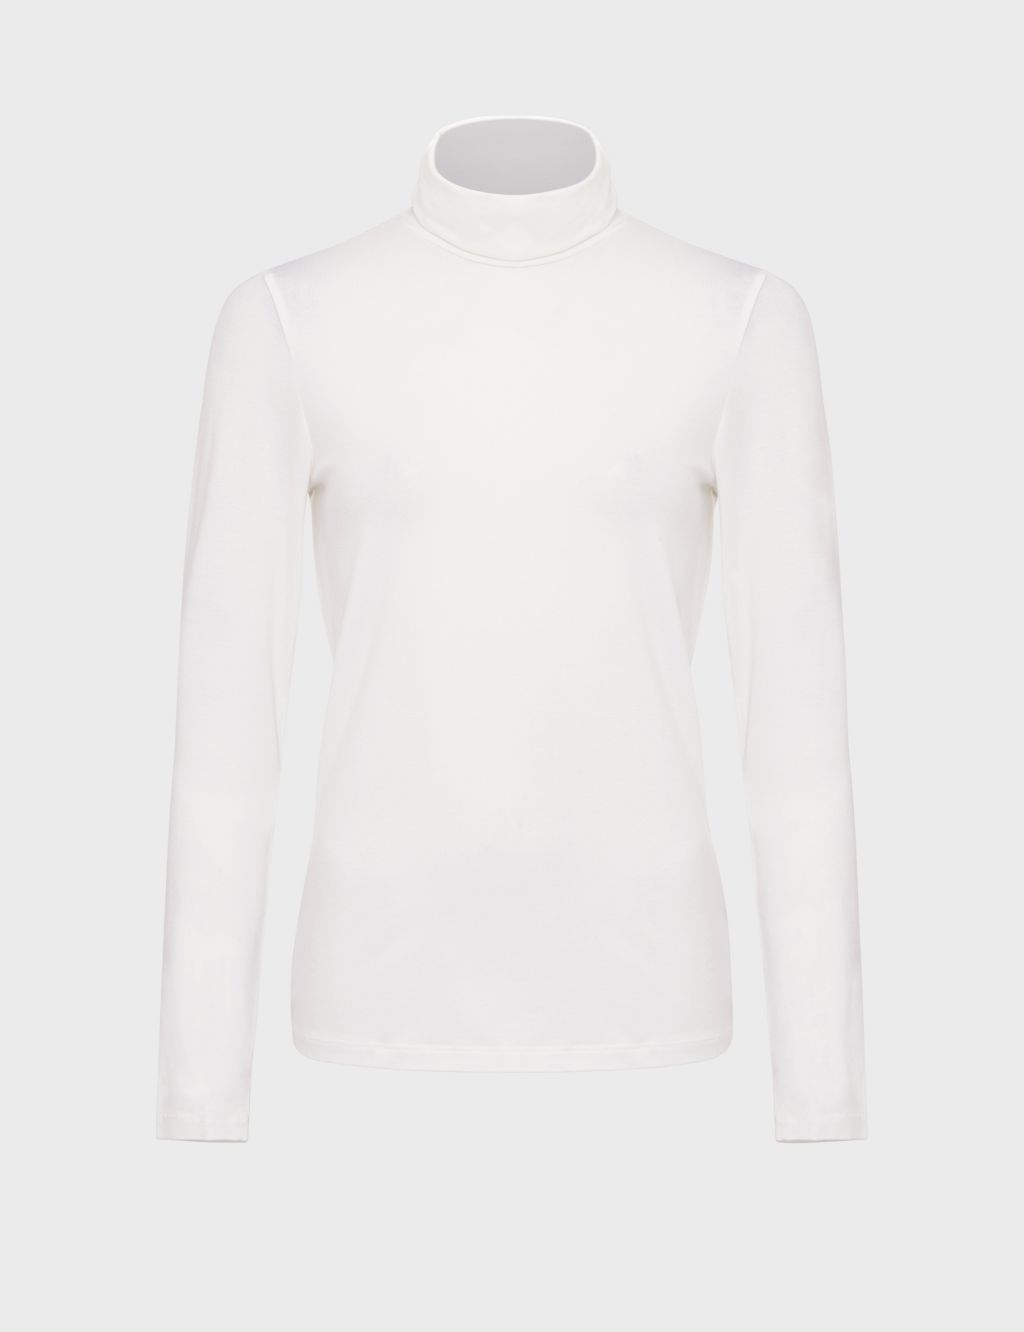 Roll Neck Top image 2